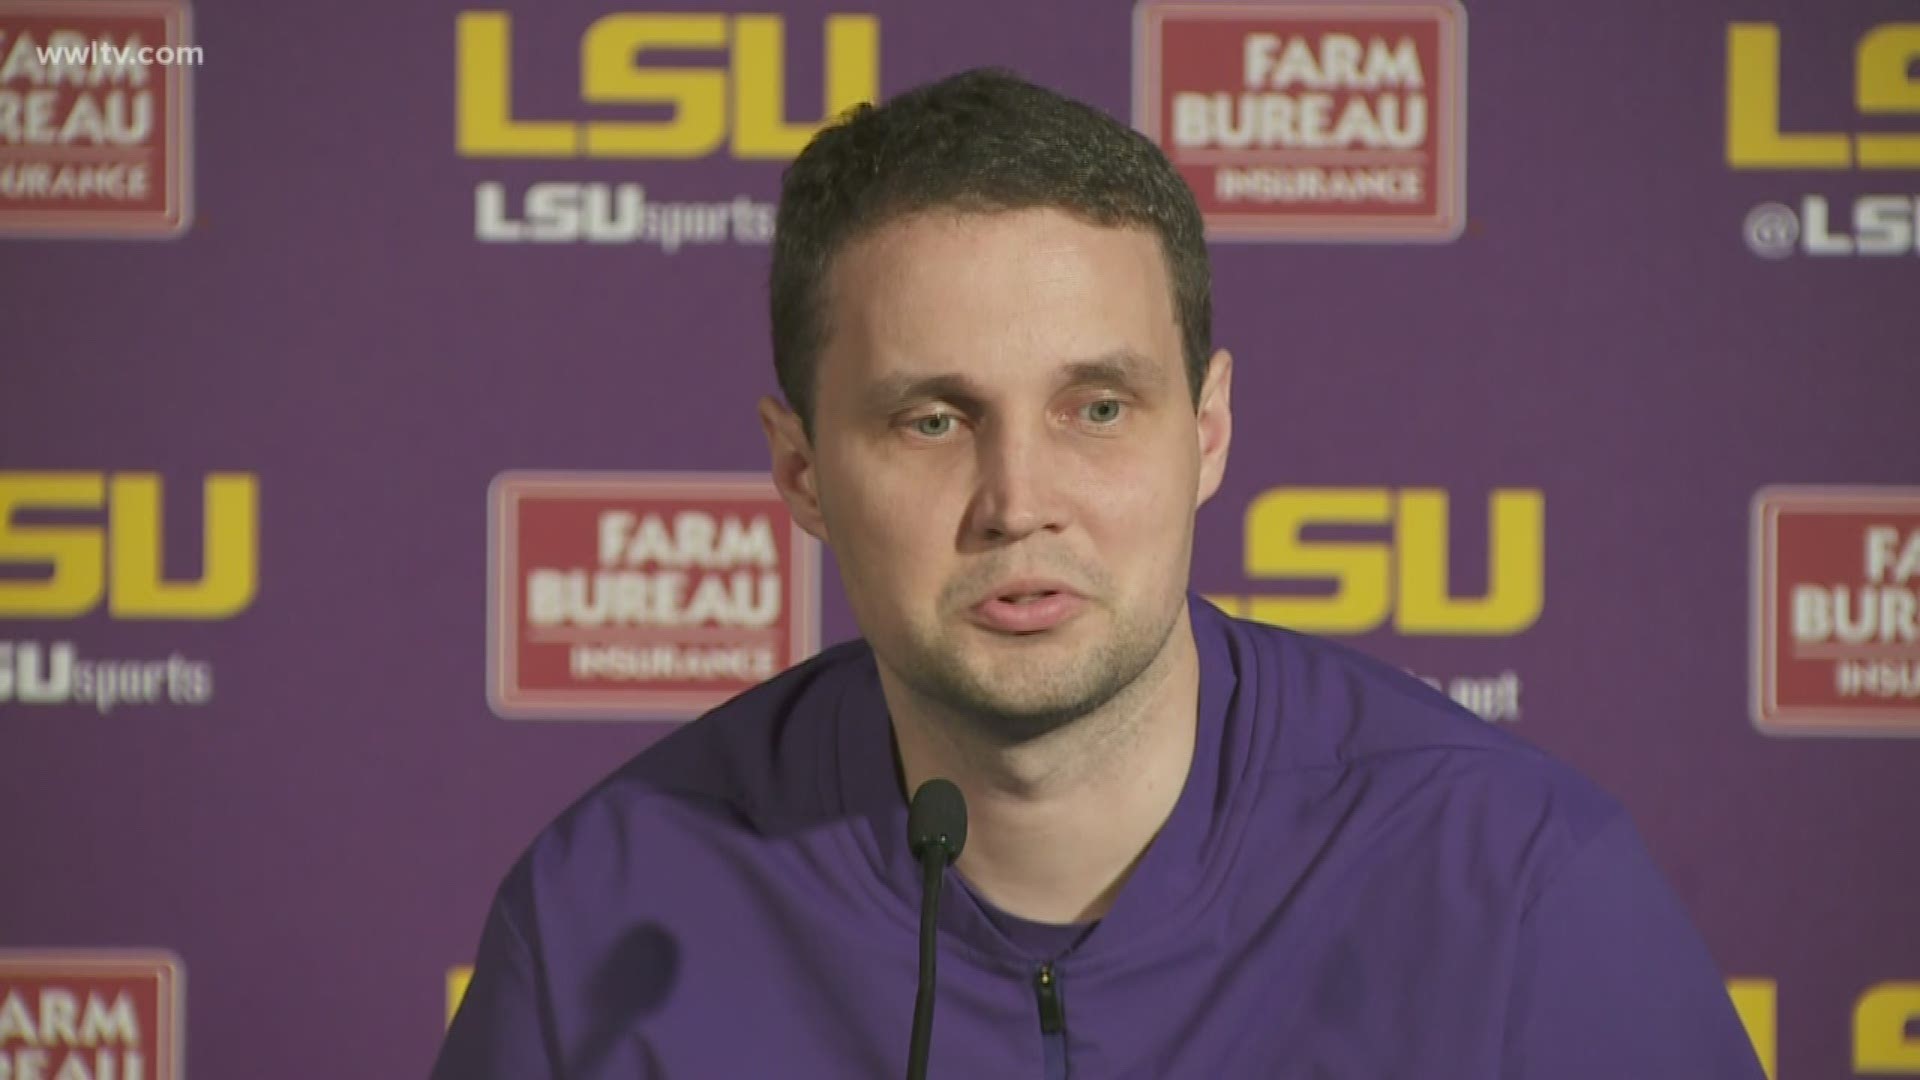 Yahoo reports that evidence in the trial will include a taped conversation between LSU basketball coach Will Wade and would-be sports agent Christian Dawkins, who's on trial in the bribery case.